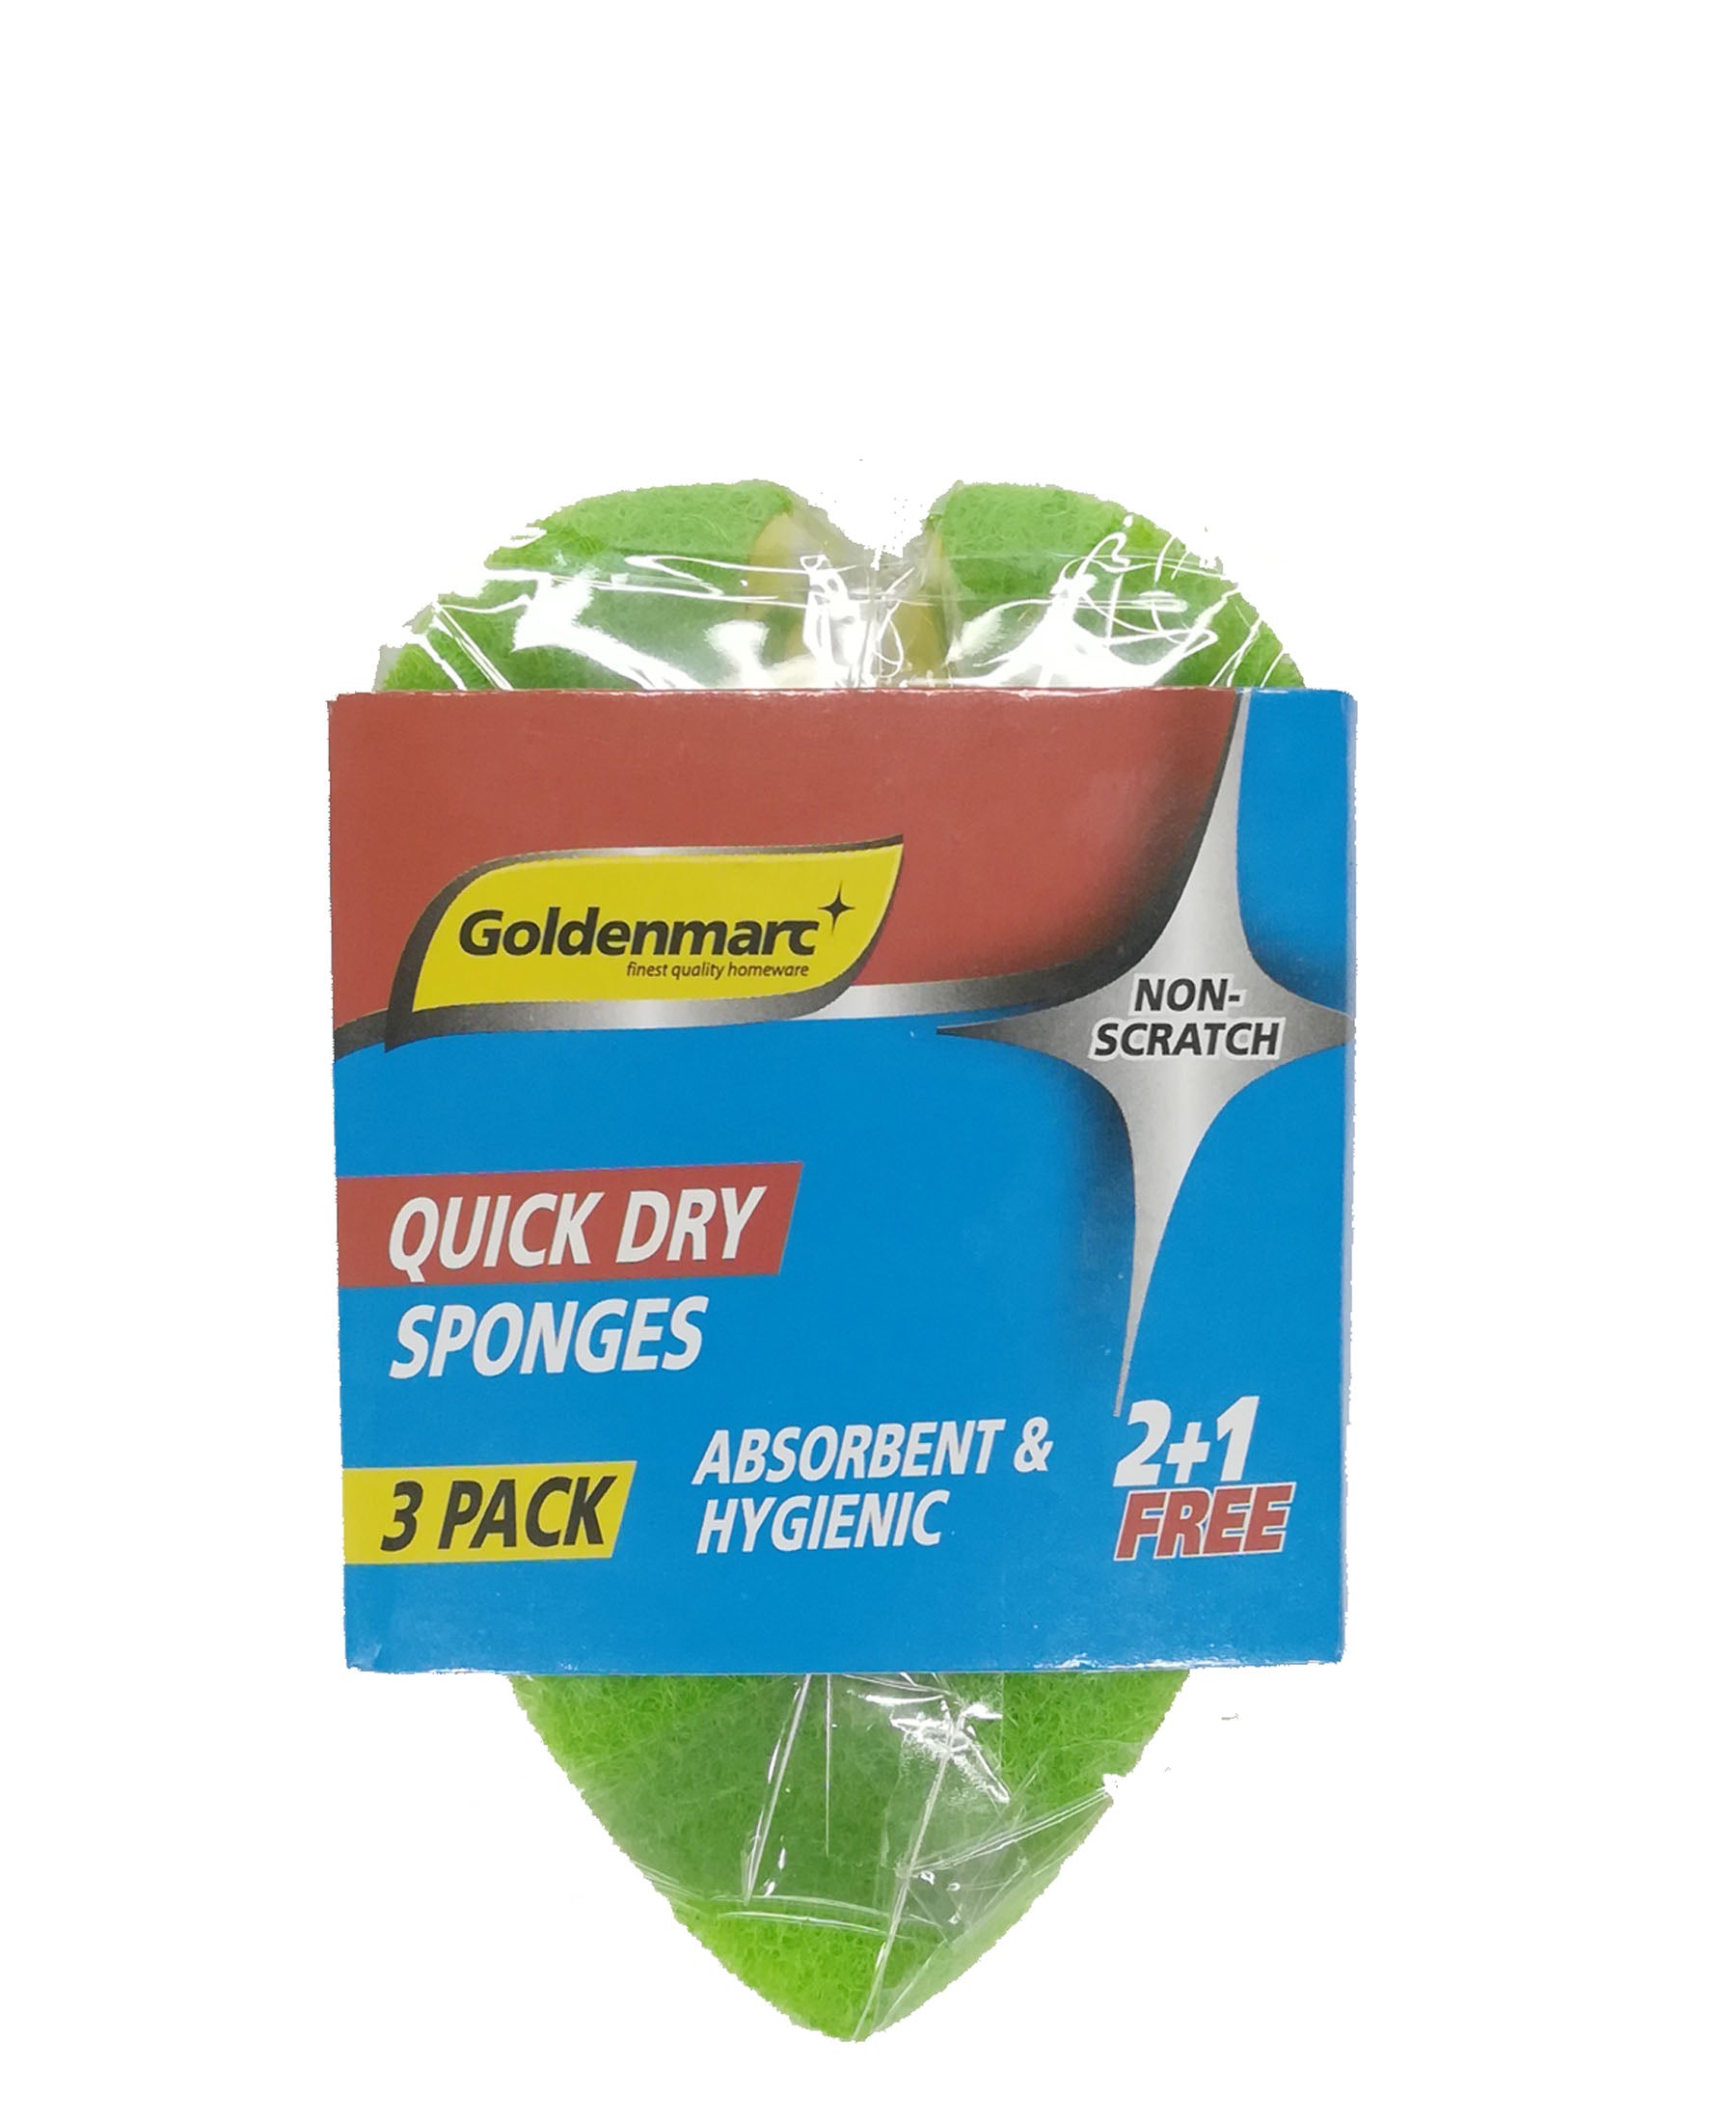 O2 3 Piece Quick Dry Sponges - Yellow & Green